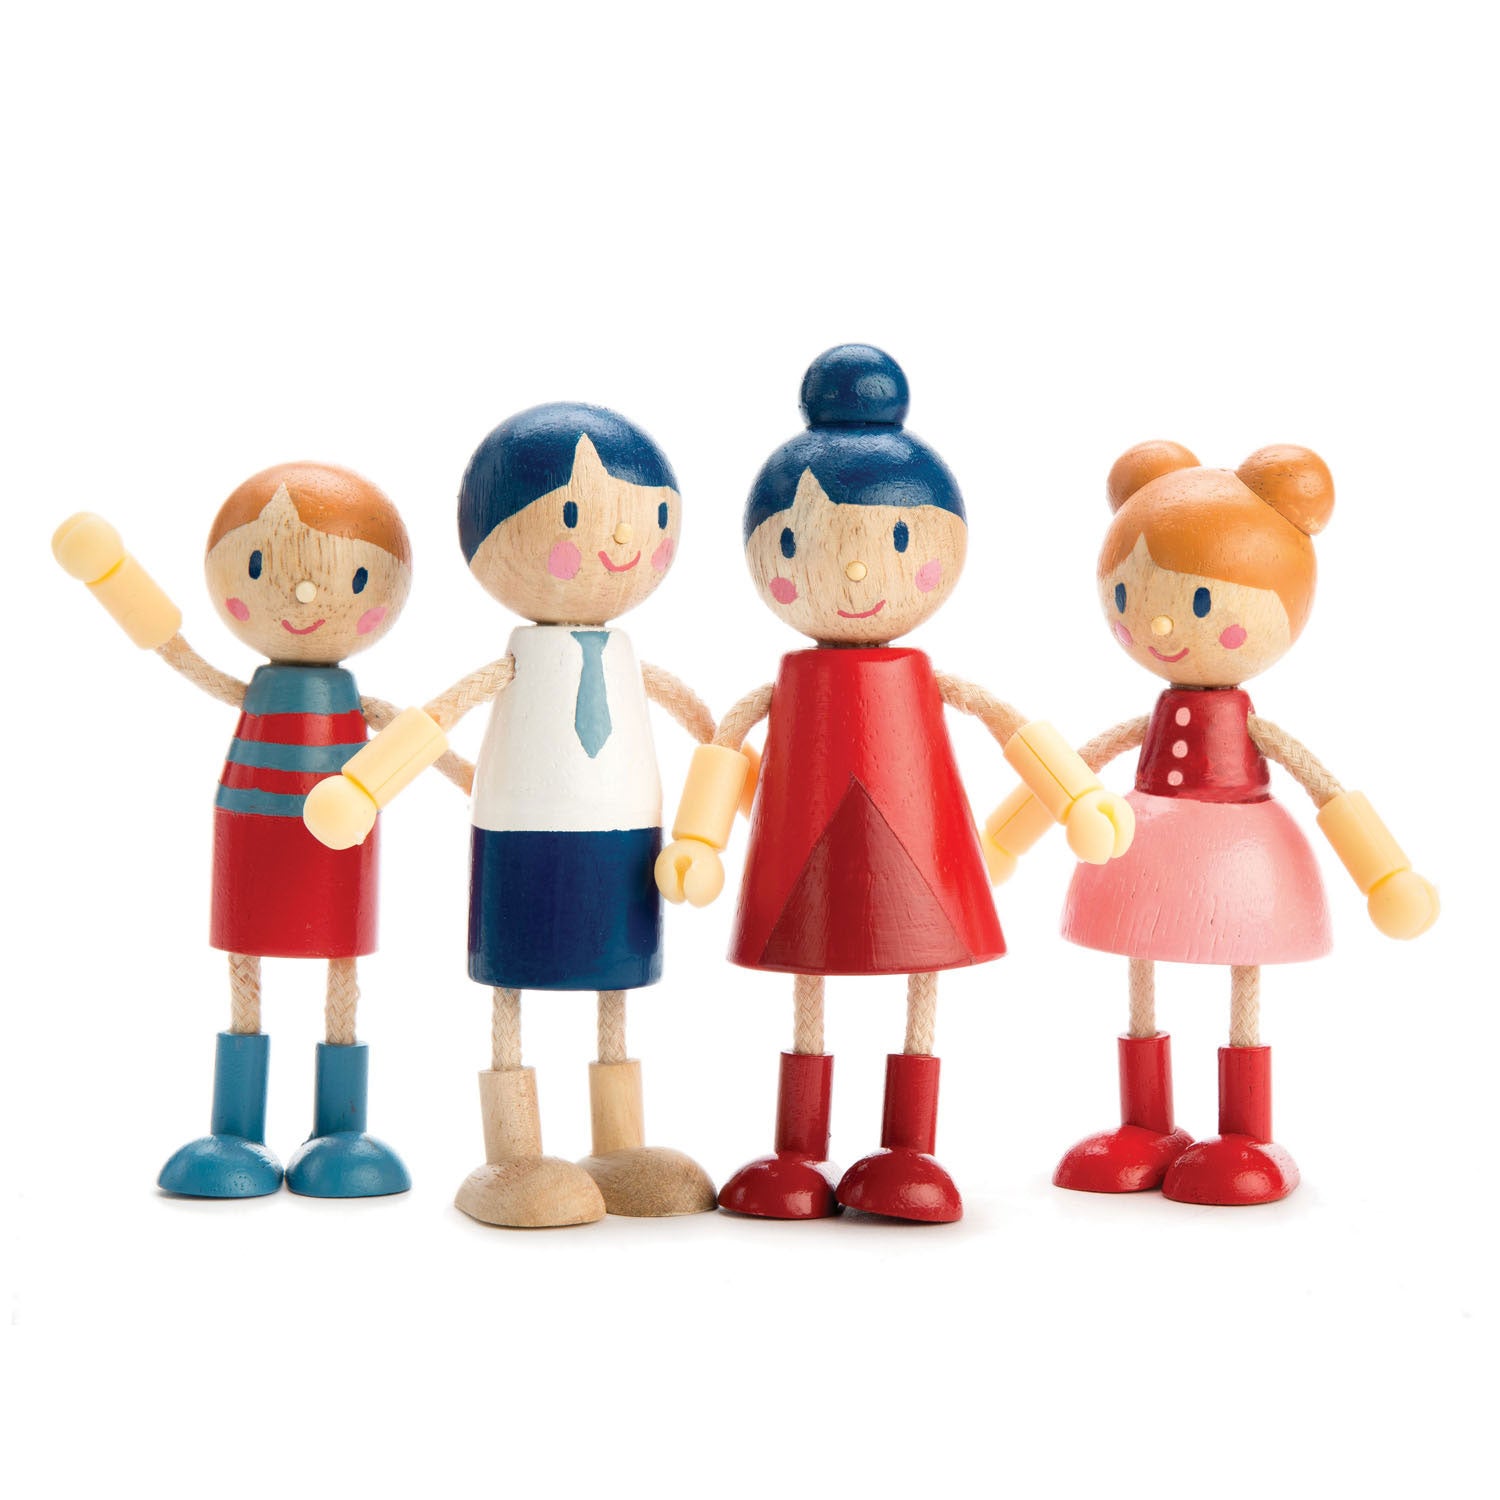 Lovely Happy Dollhouse Dolls Family Set of 8 Wooden Figures for